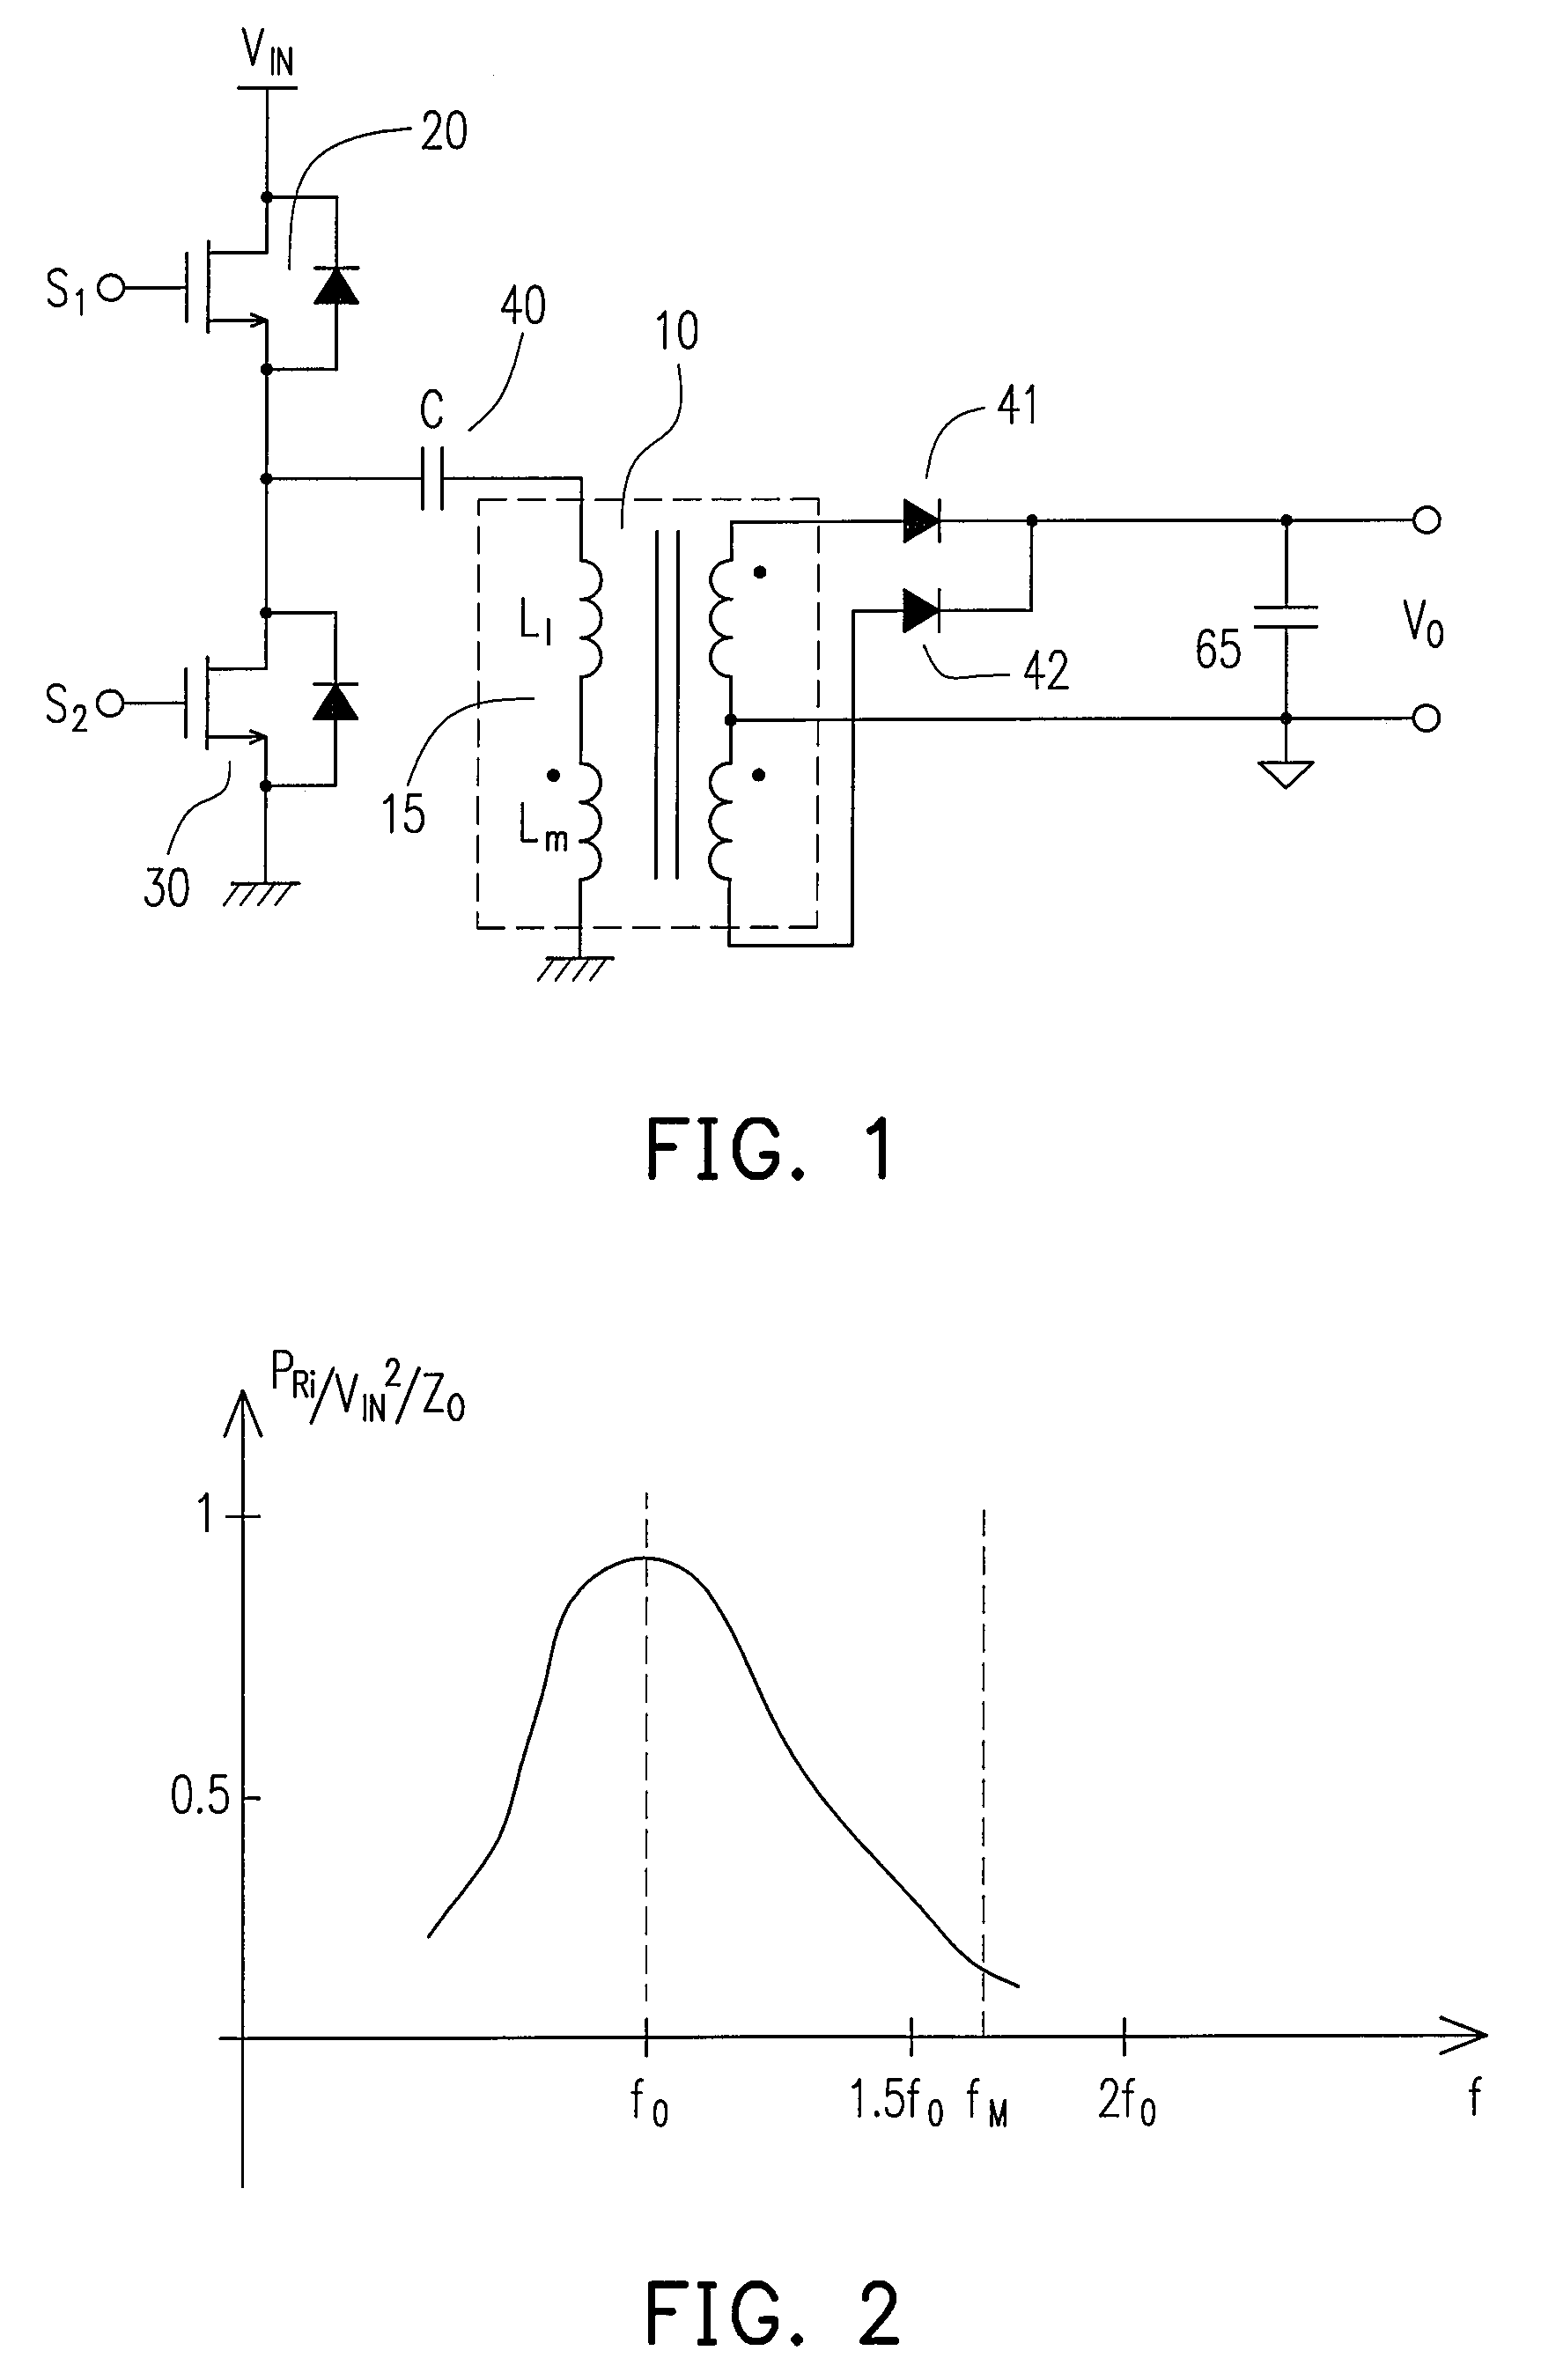 Synchronous rectifying circuit for resonant power converters